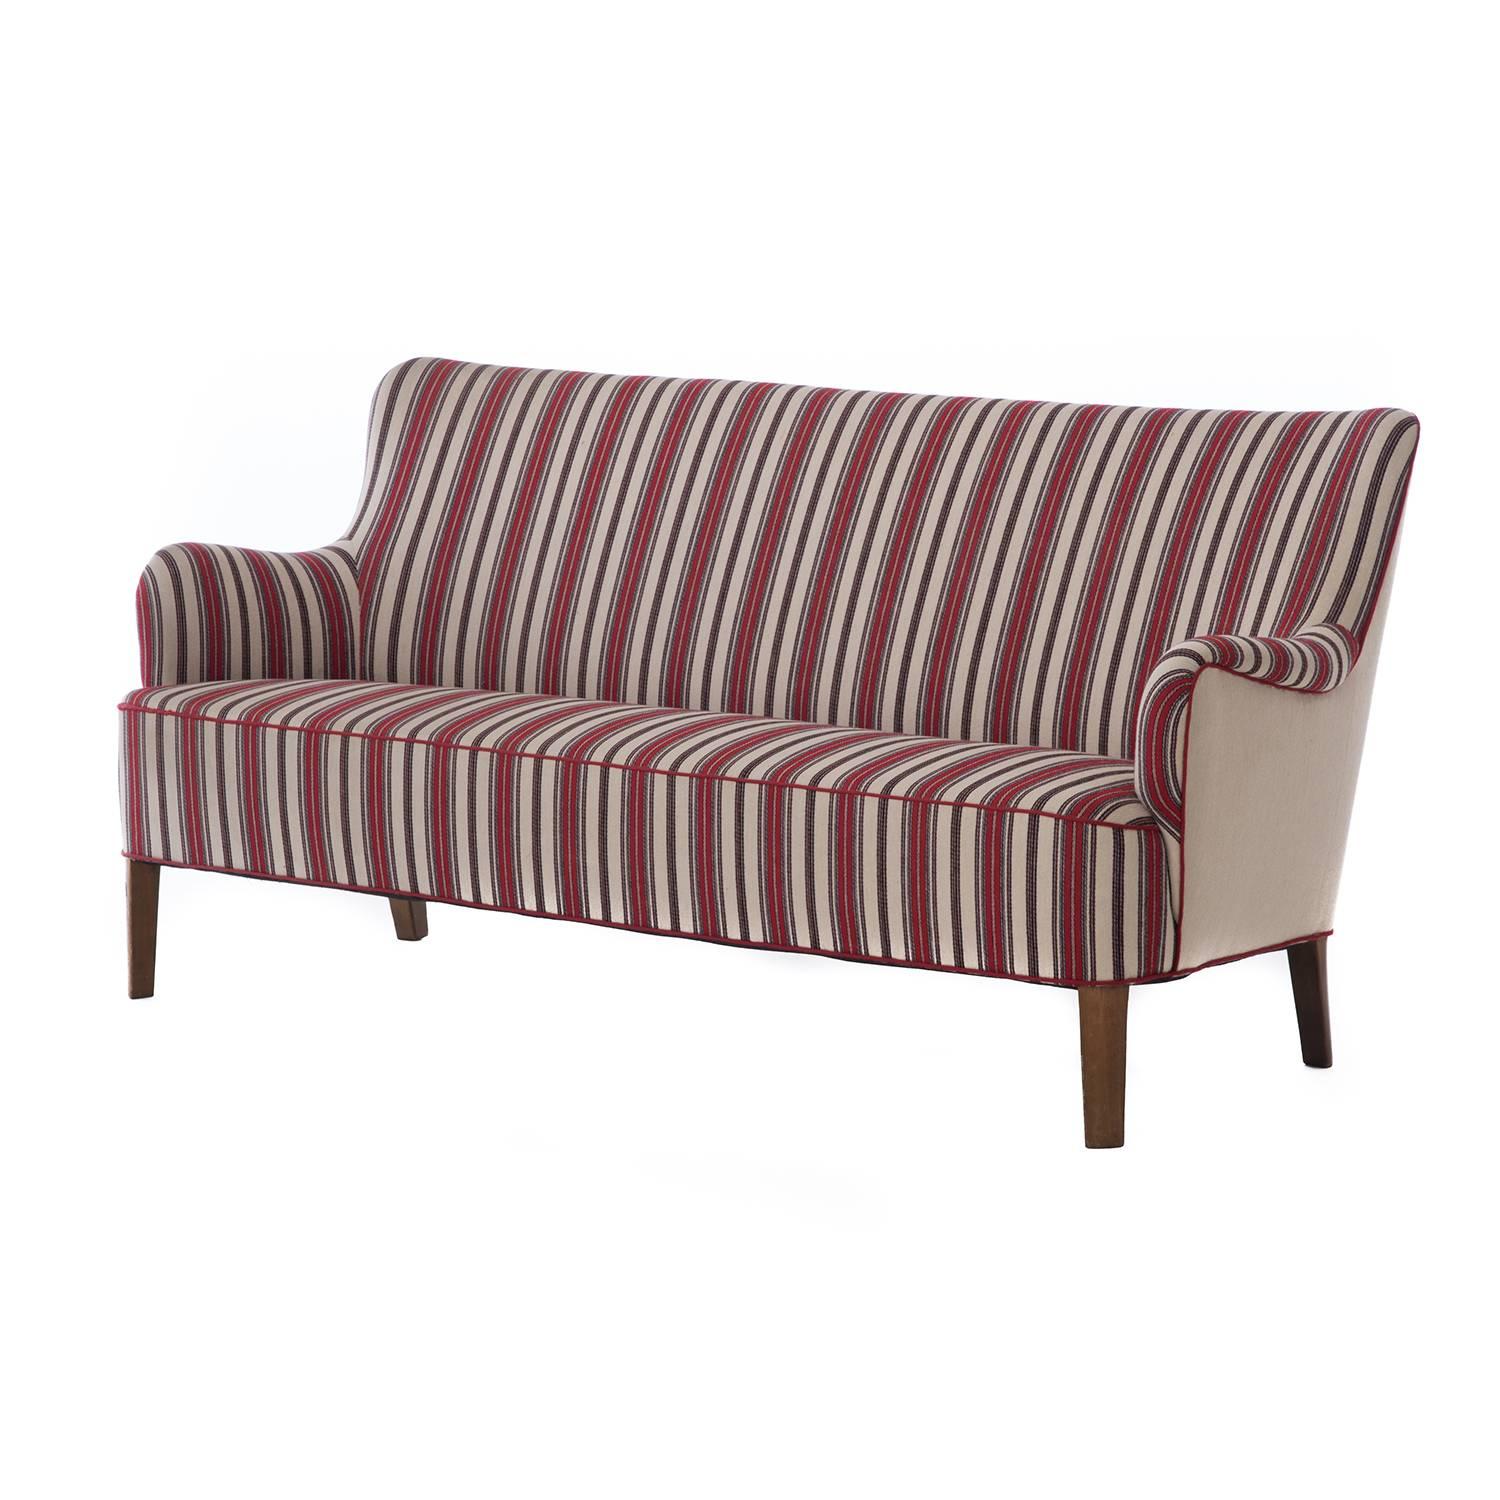 This lovely Danish modern settee is a Classic example of refined early 20th century Scandinavia from the 1930s. It retains its high quality wool upholstery in excellent condition. Note that the back is upholstered in a solid wool at one point in